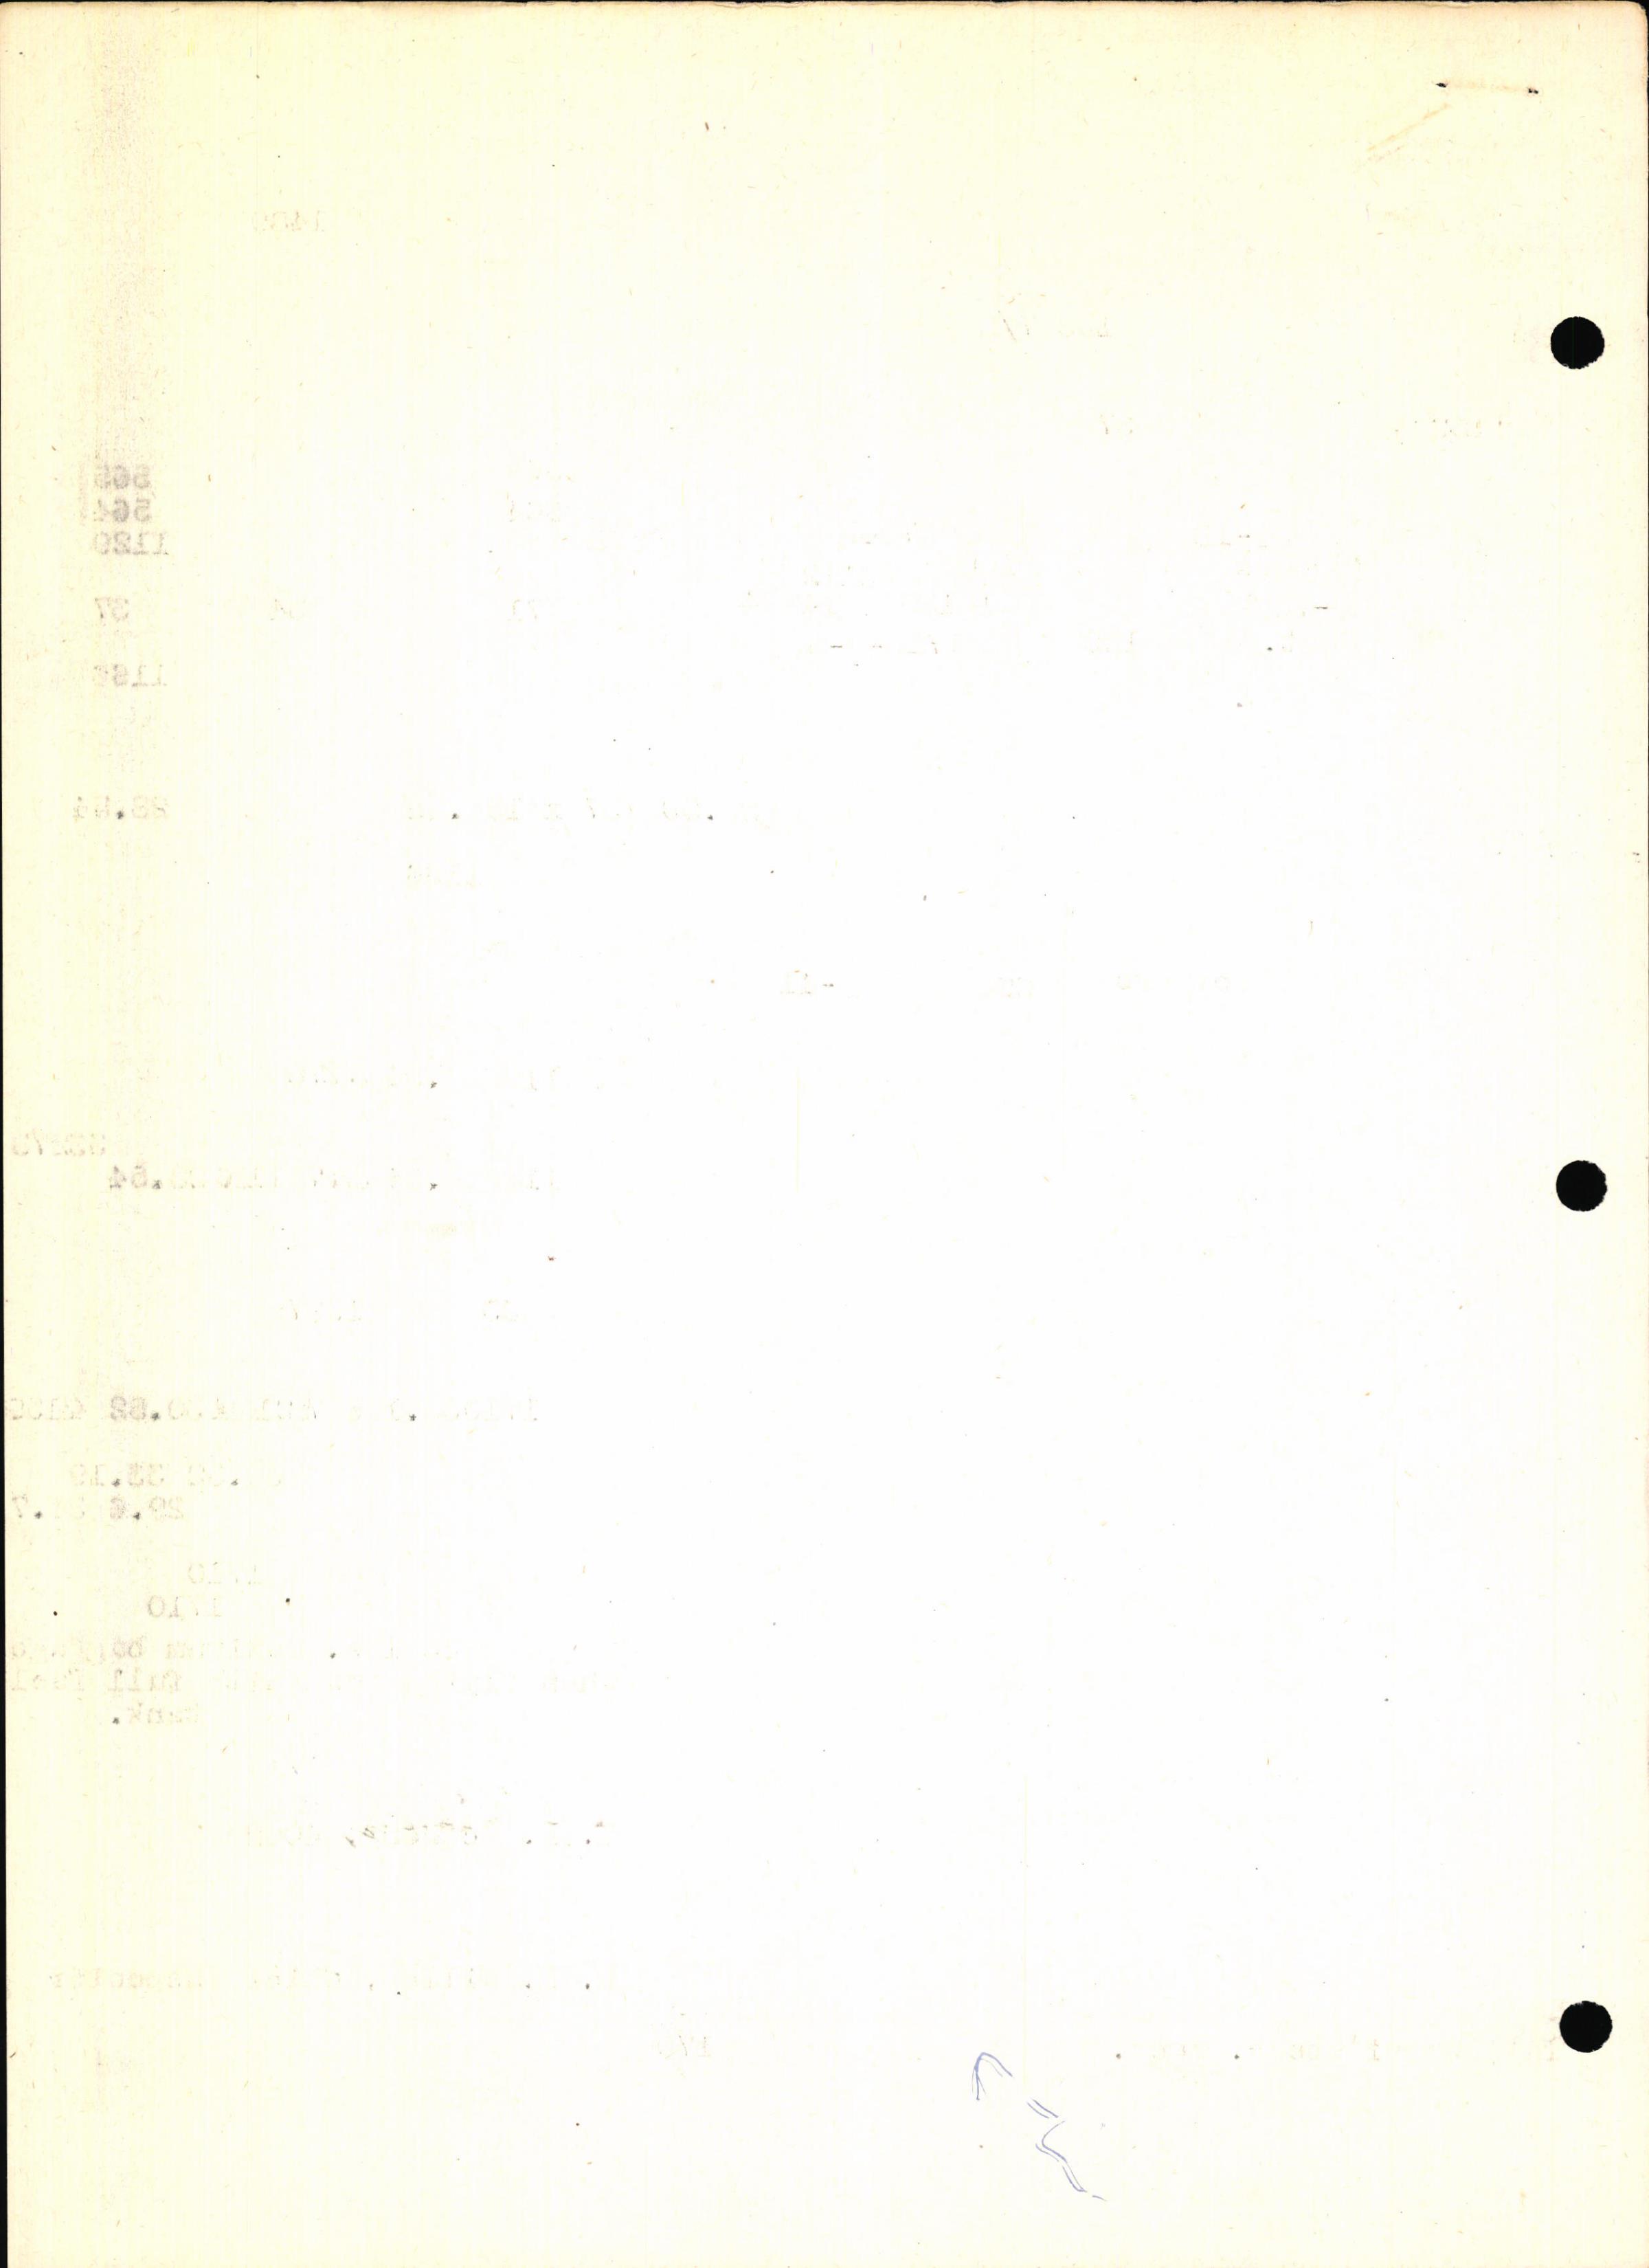 Sample page 8 from AirCorps Library document: Technical Information for Serial Number 1489